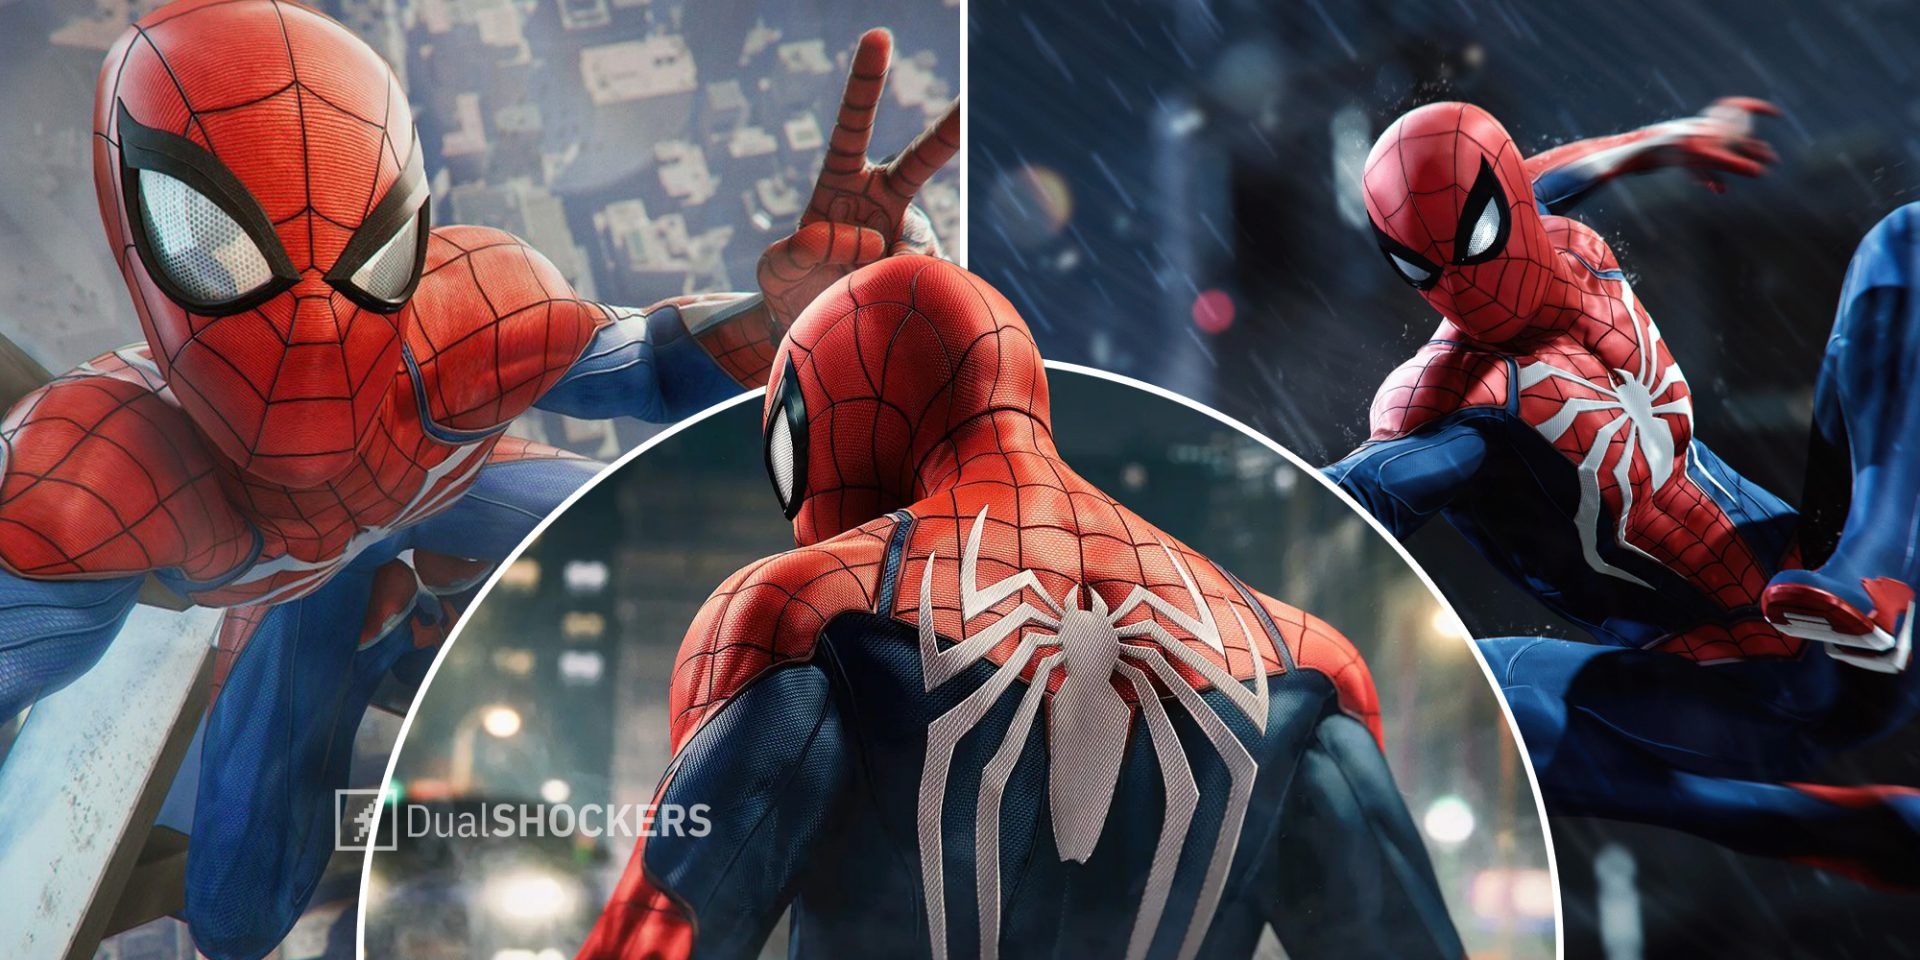 Spider-Man posing on the edge of a building on left, Spider-Man with his back shown in middle, Spider-Man flying through the sky on right